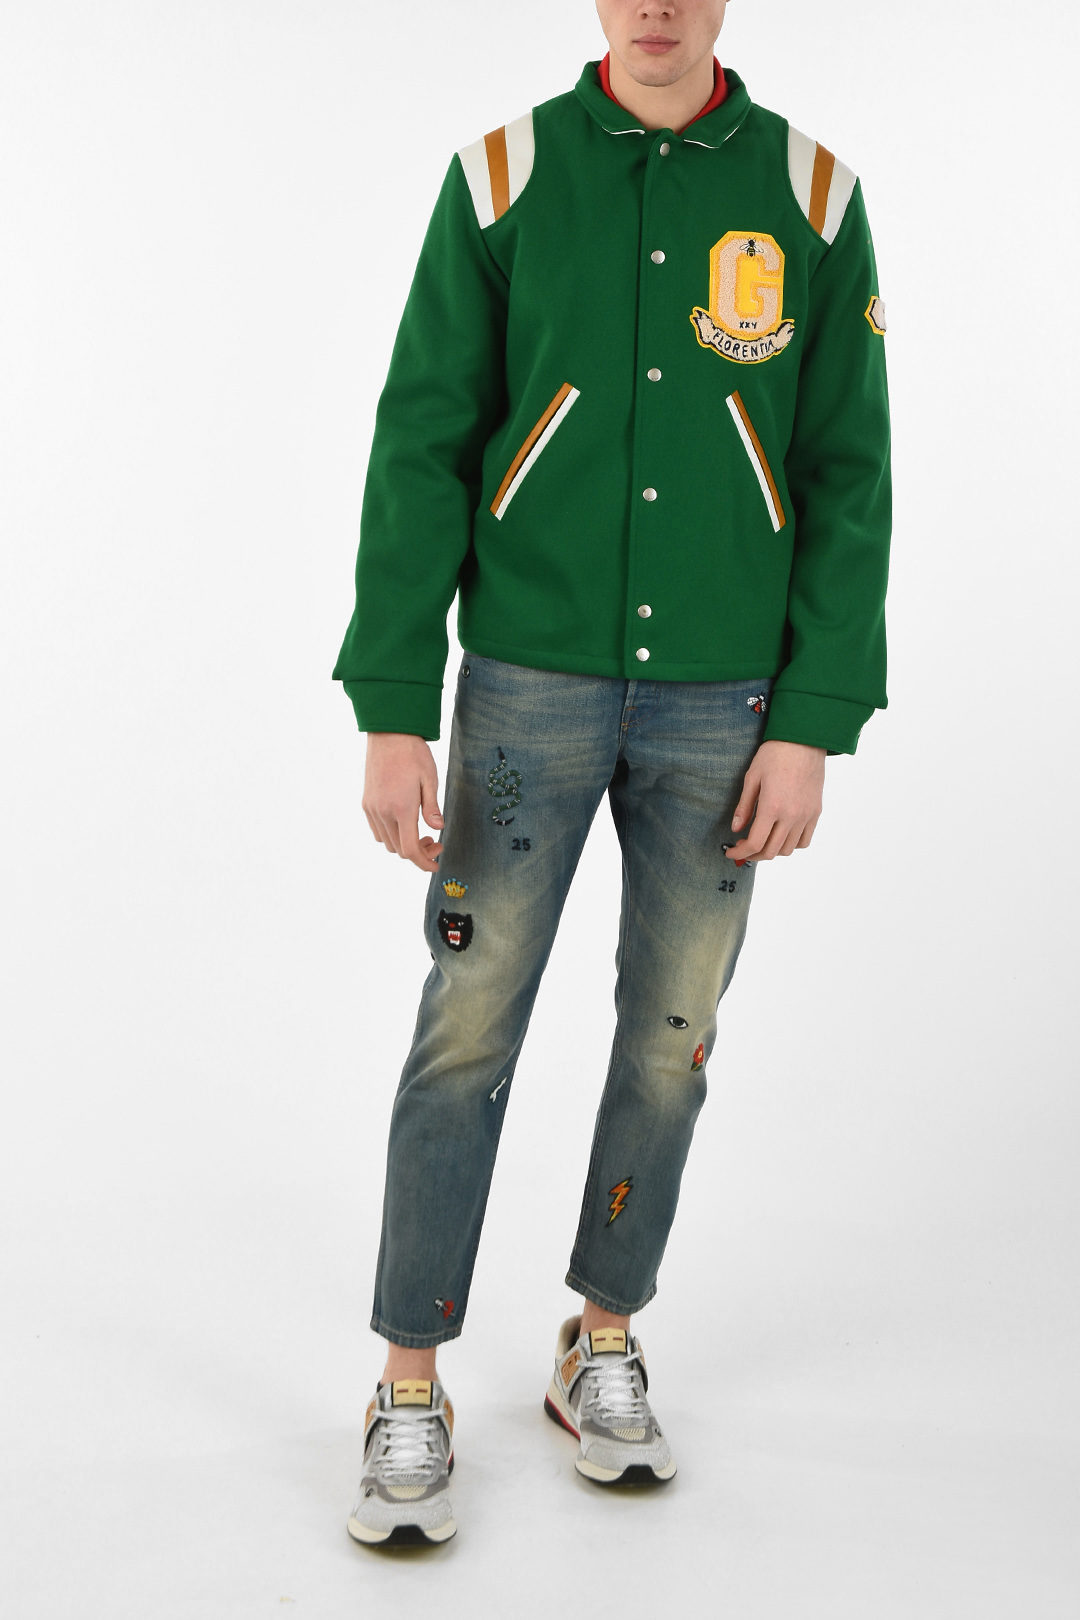 Gucci wool varsity jacket with Leather Details men - Glamood Outlet